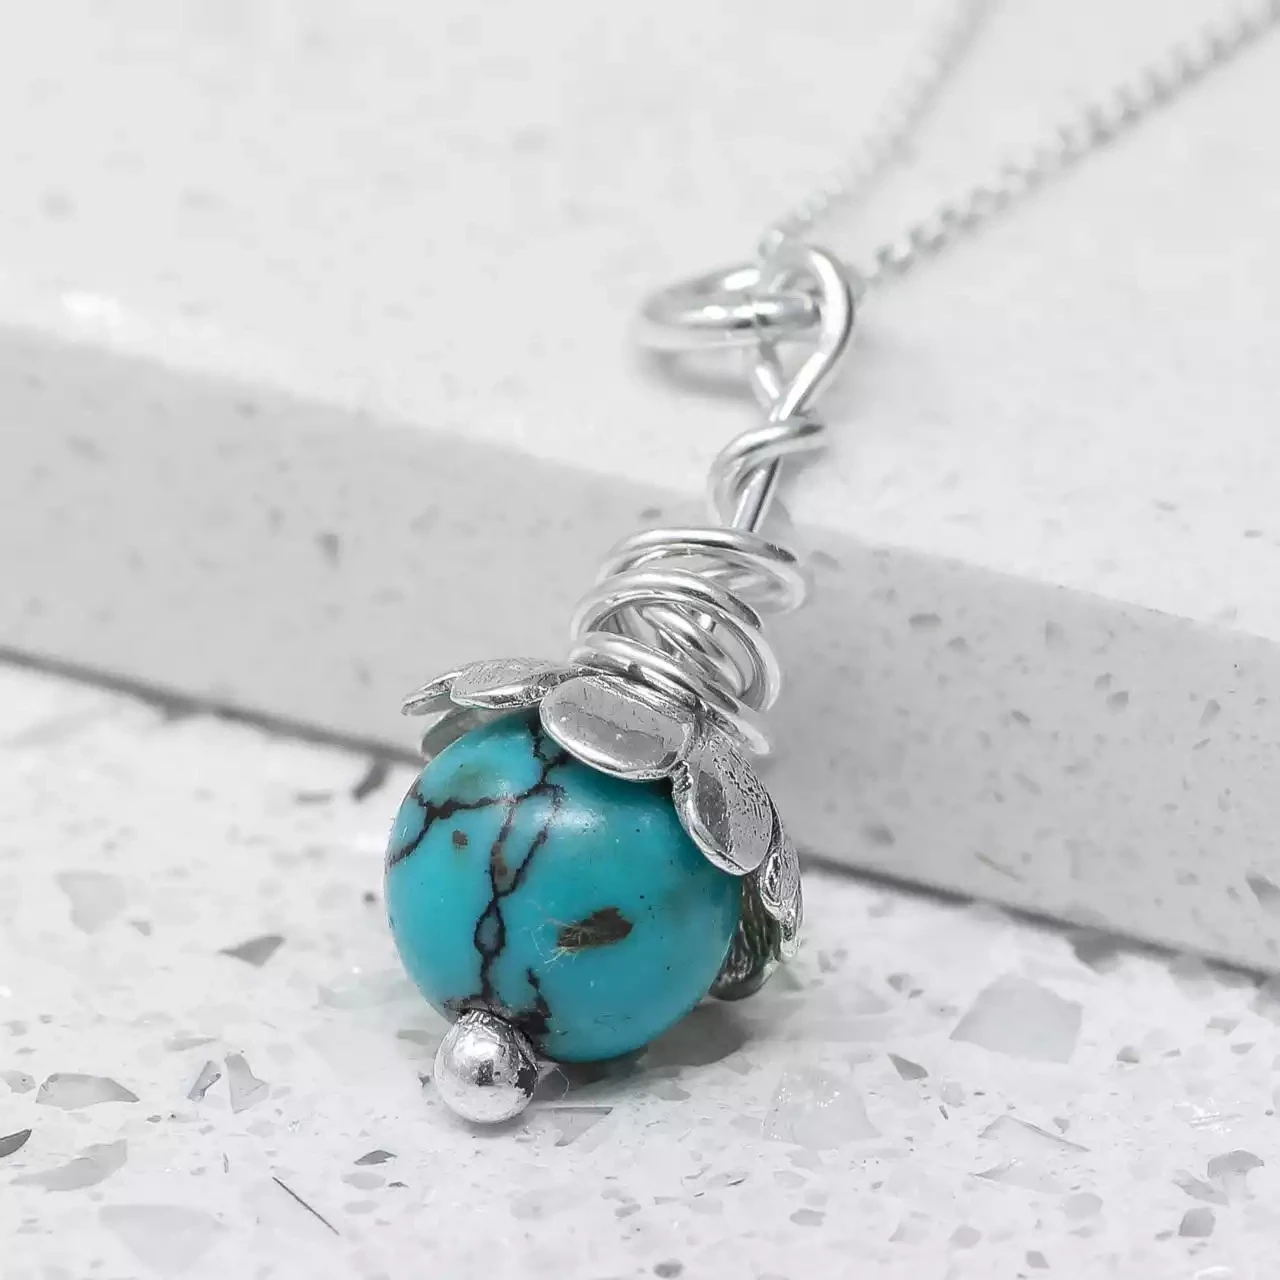 Dangly Silver Flower Pendant With Turquoise by Fi Mehra